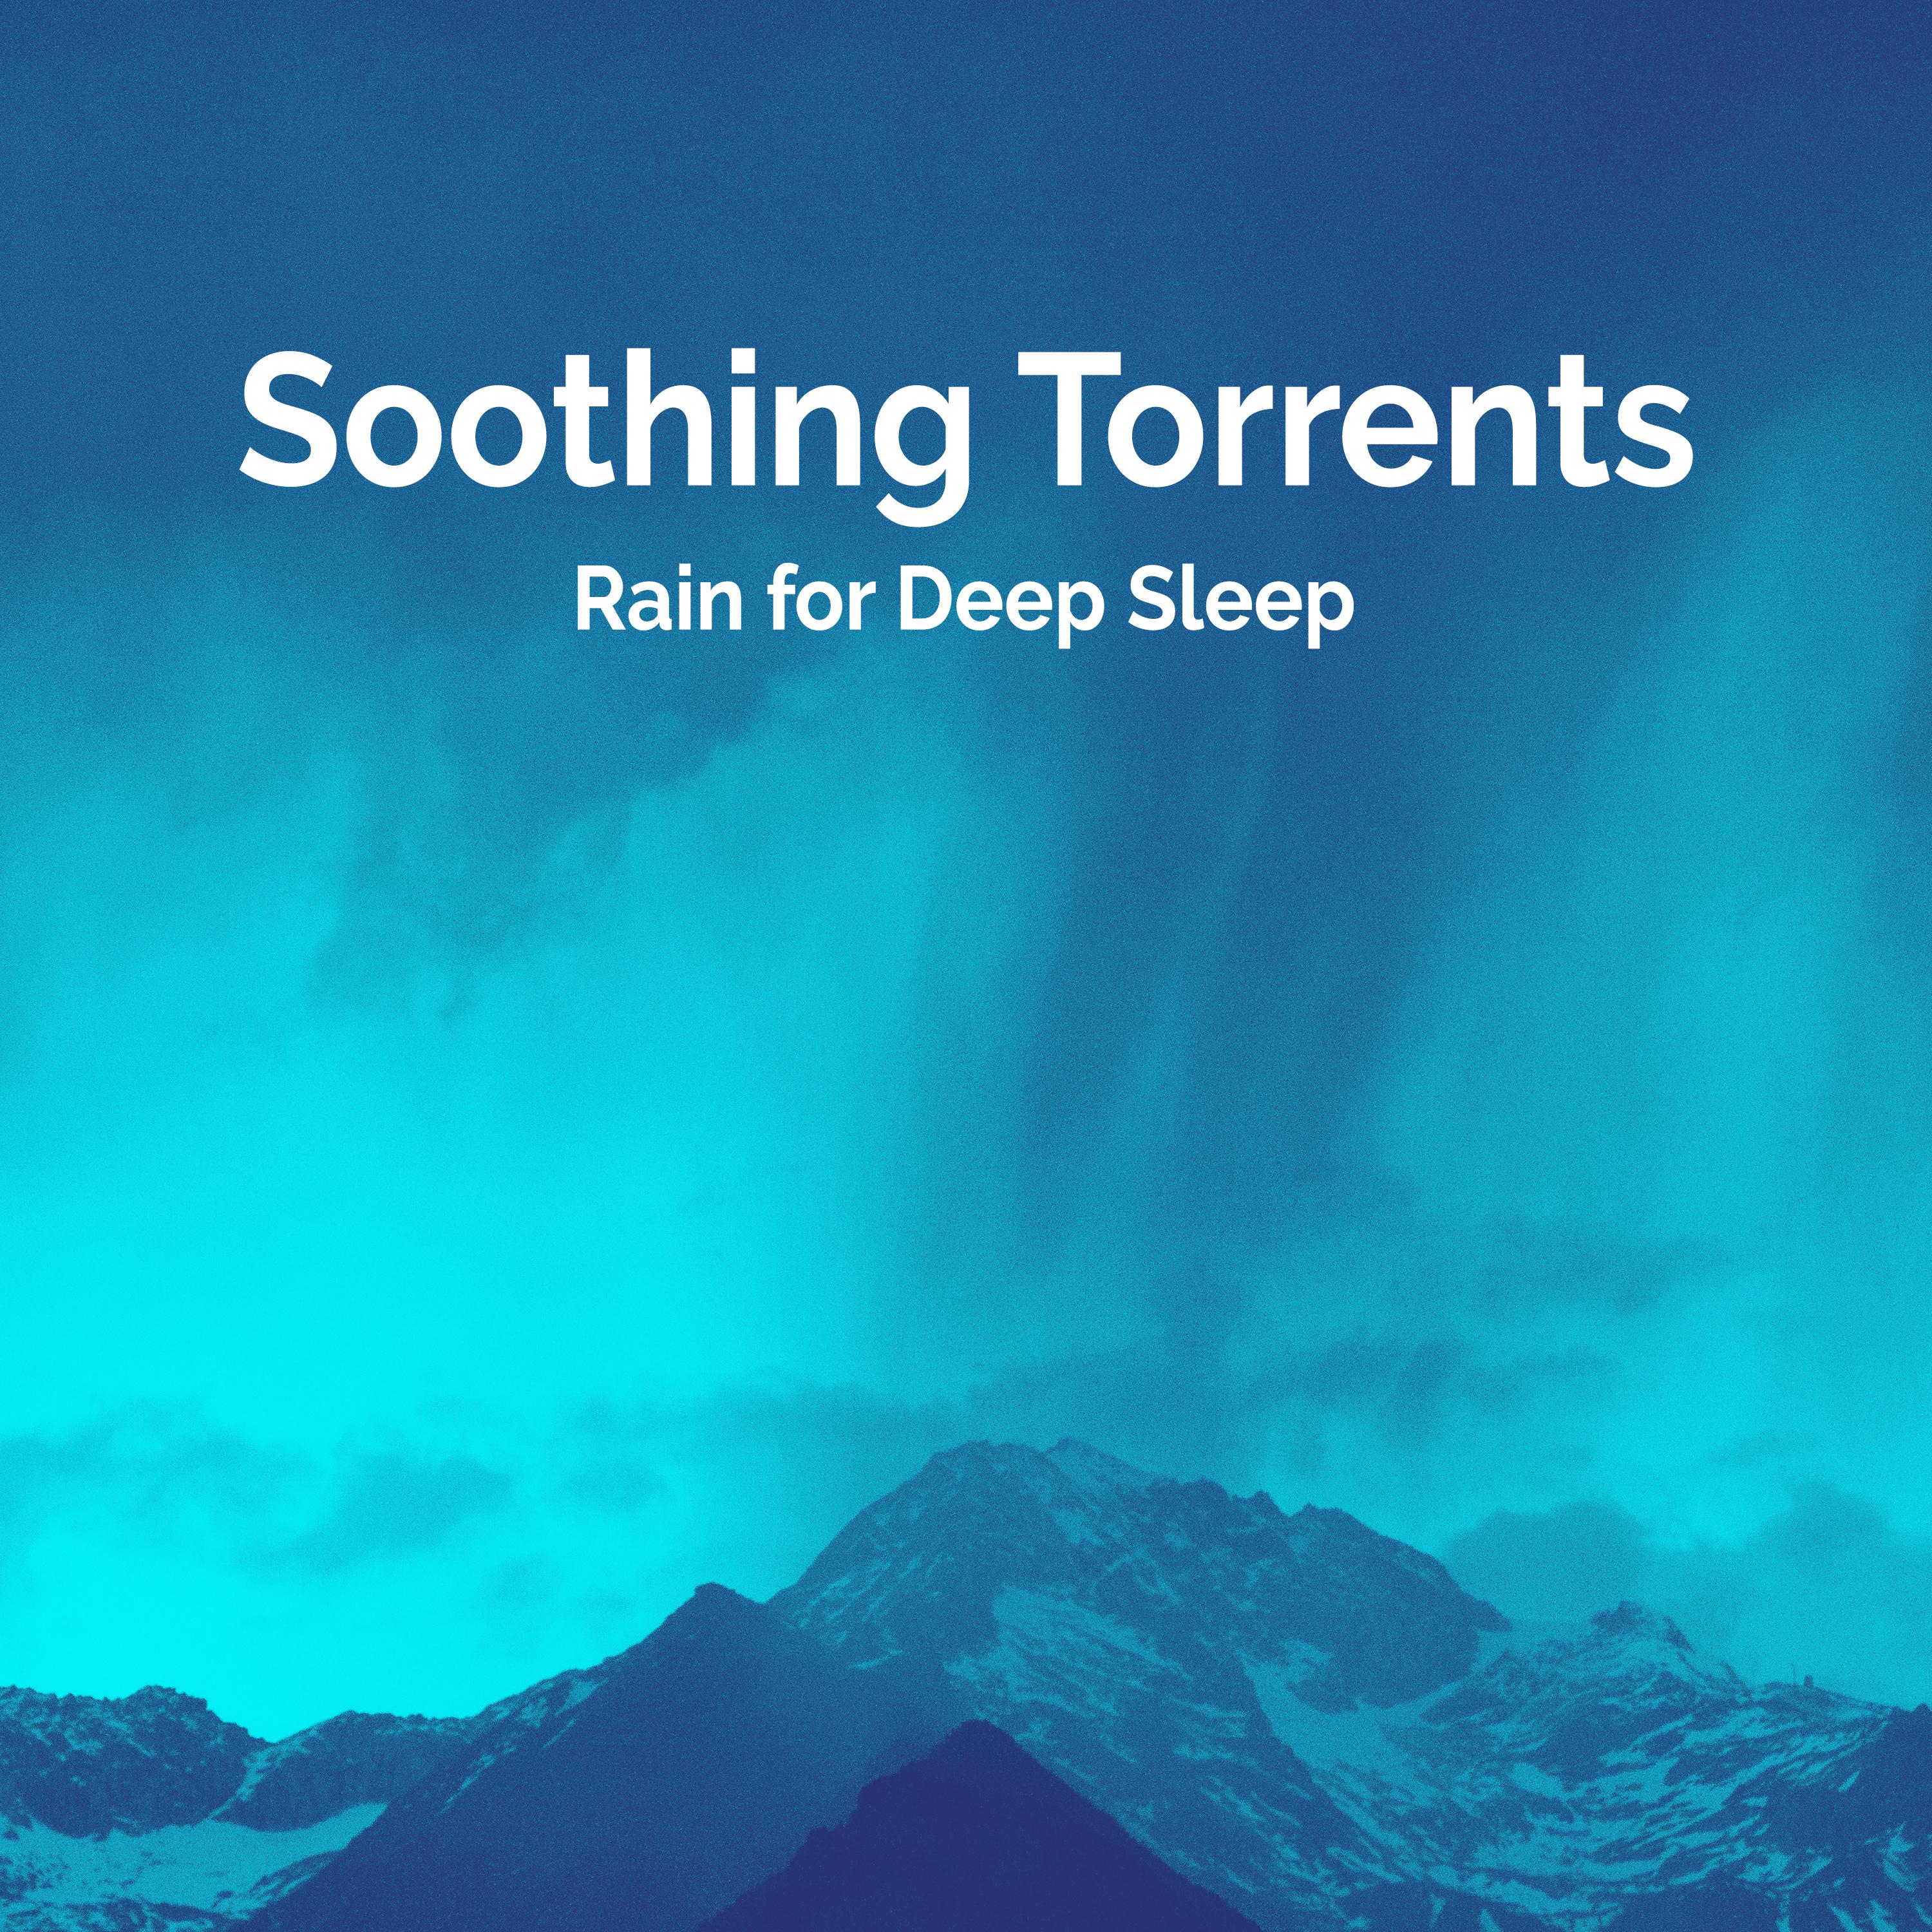 Soothing Torrents